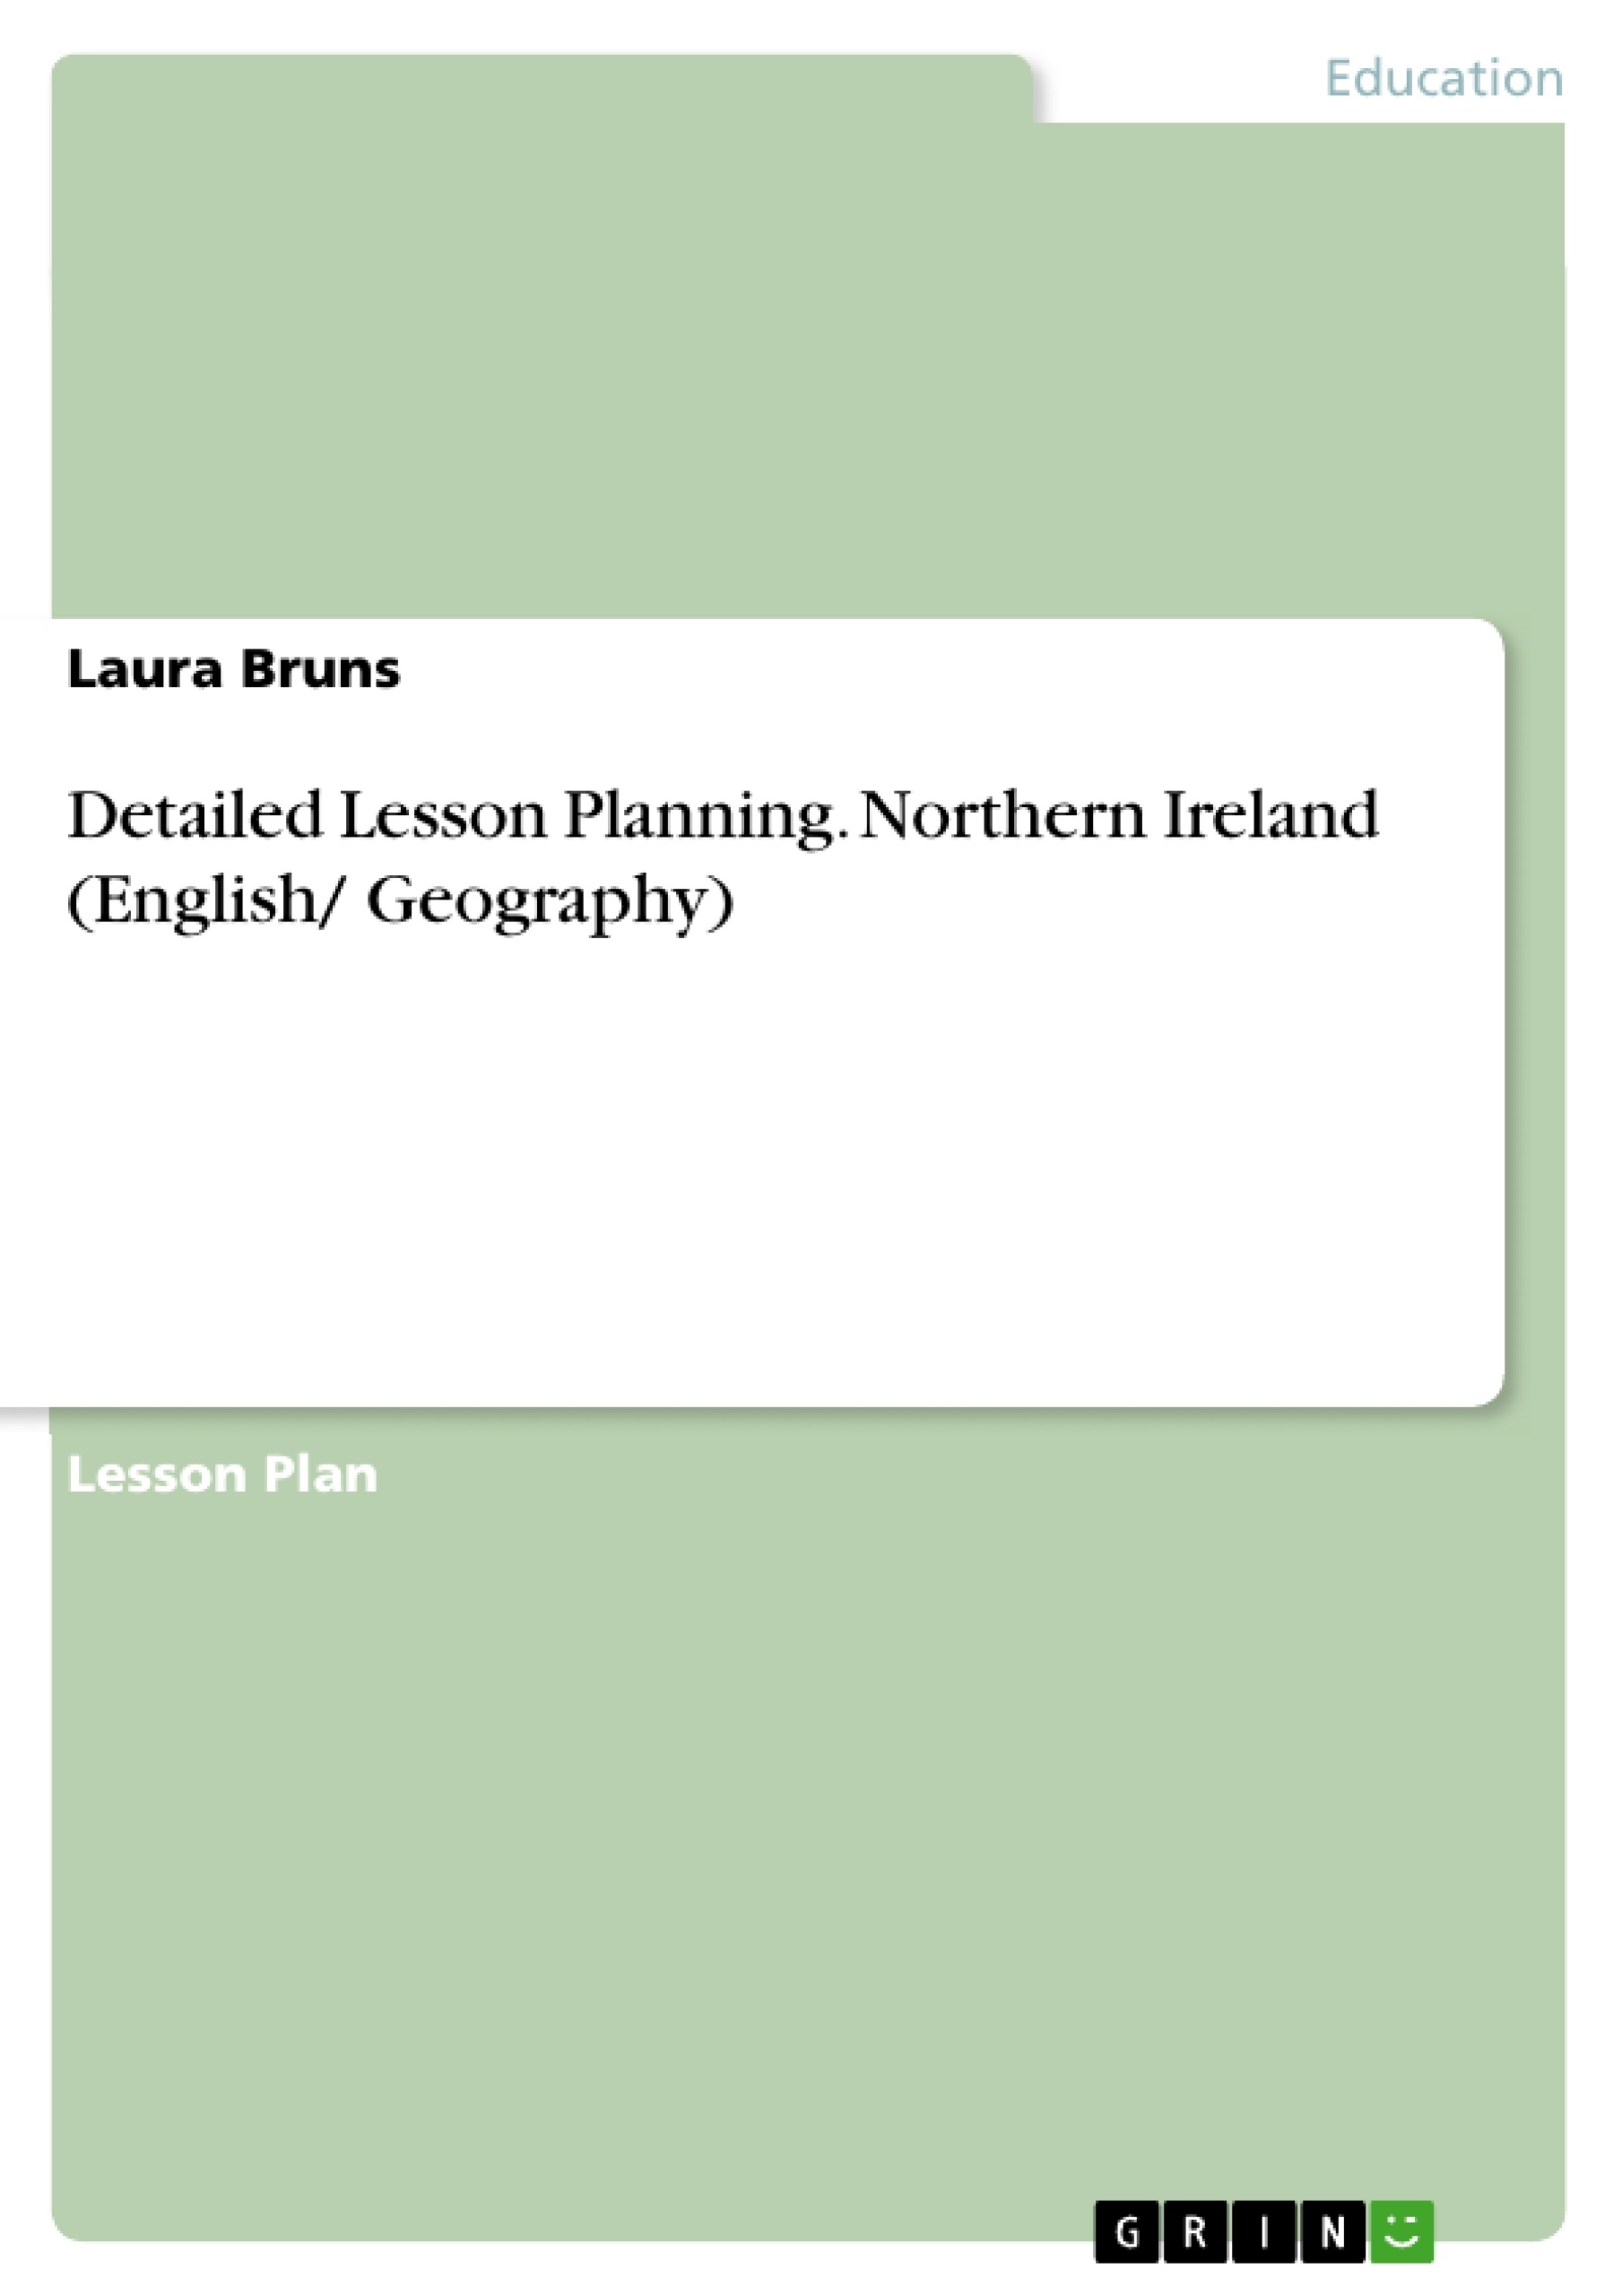 Título: Detailed Lesson Planning. Northern Ireland (English/ Geography)